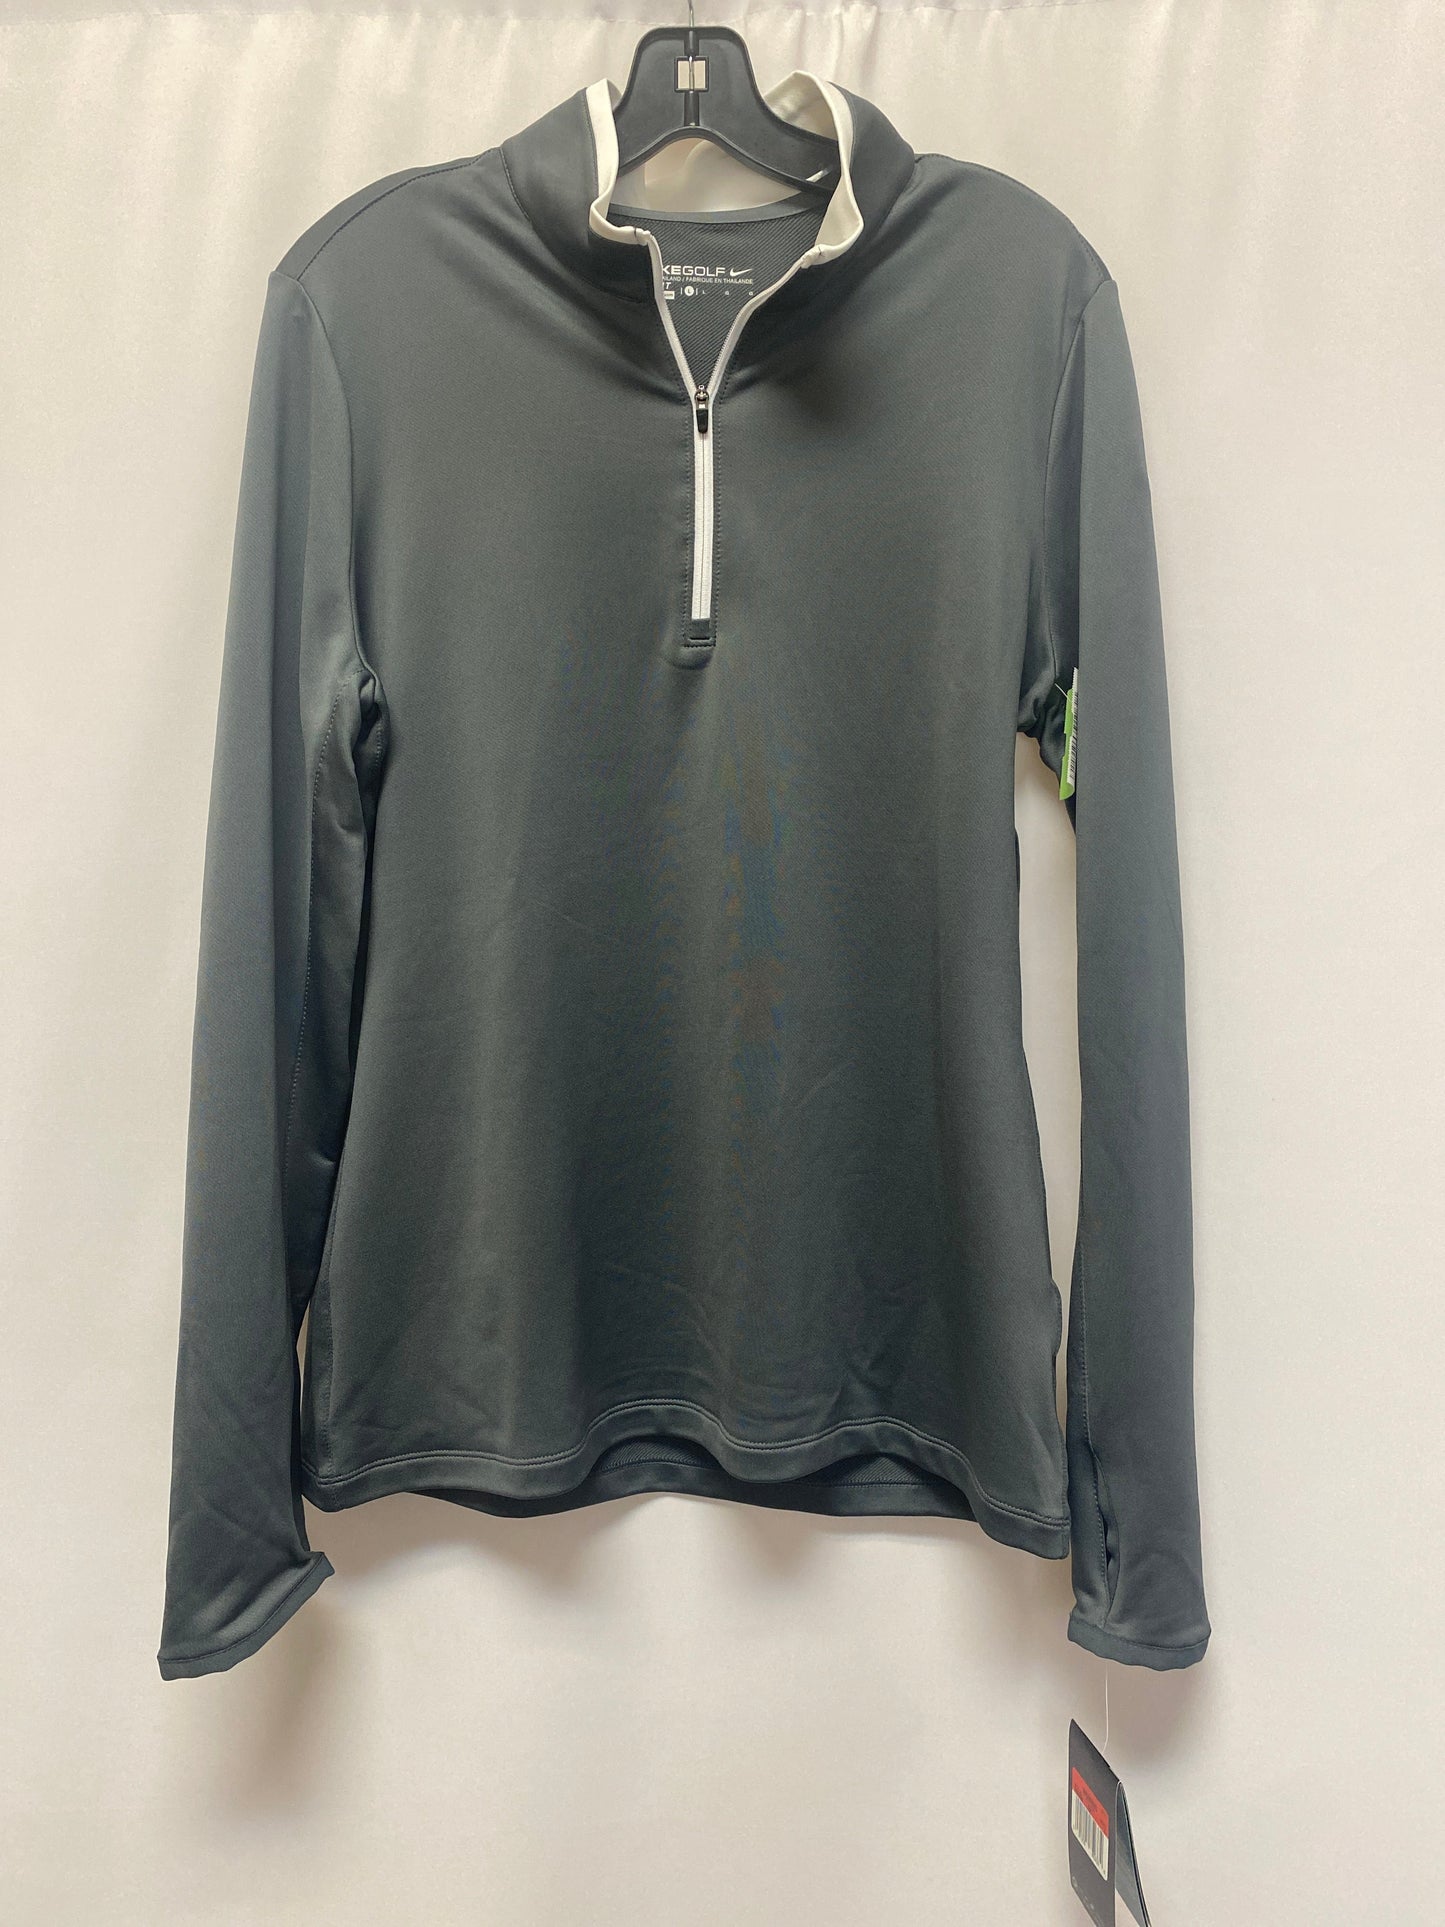 Athletic Top Long Sleeve Collar By Nike  Size: L